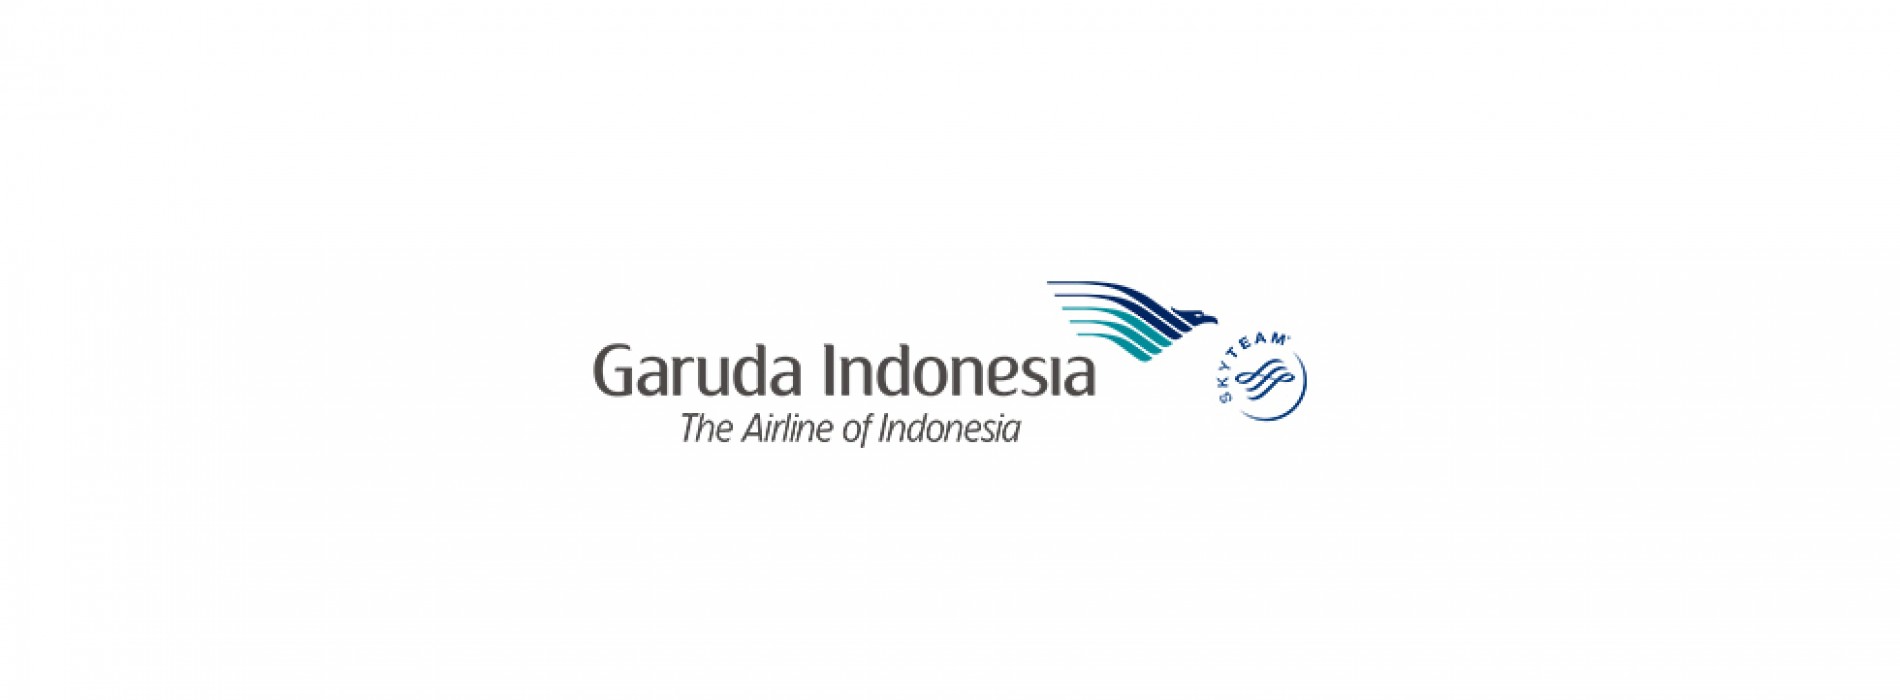 Garuda Indonesia signs with Sabre to support growth strategy